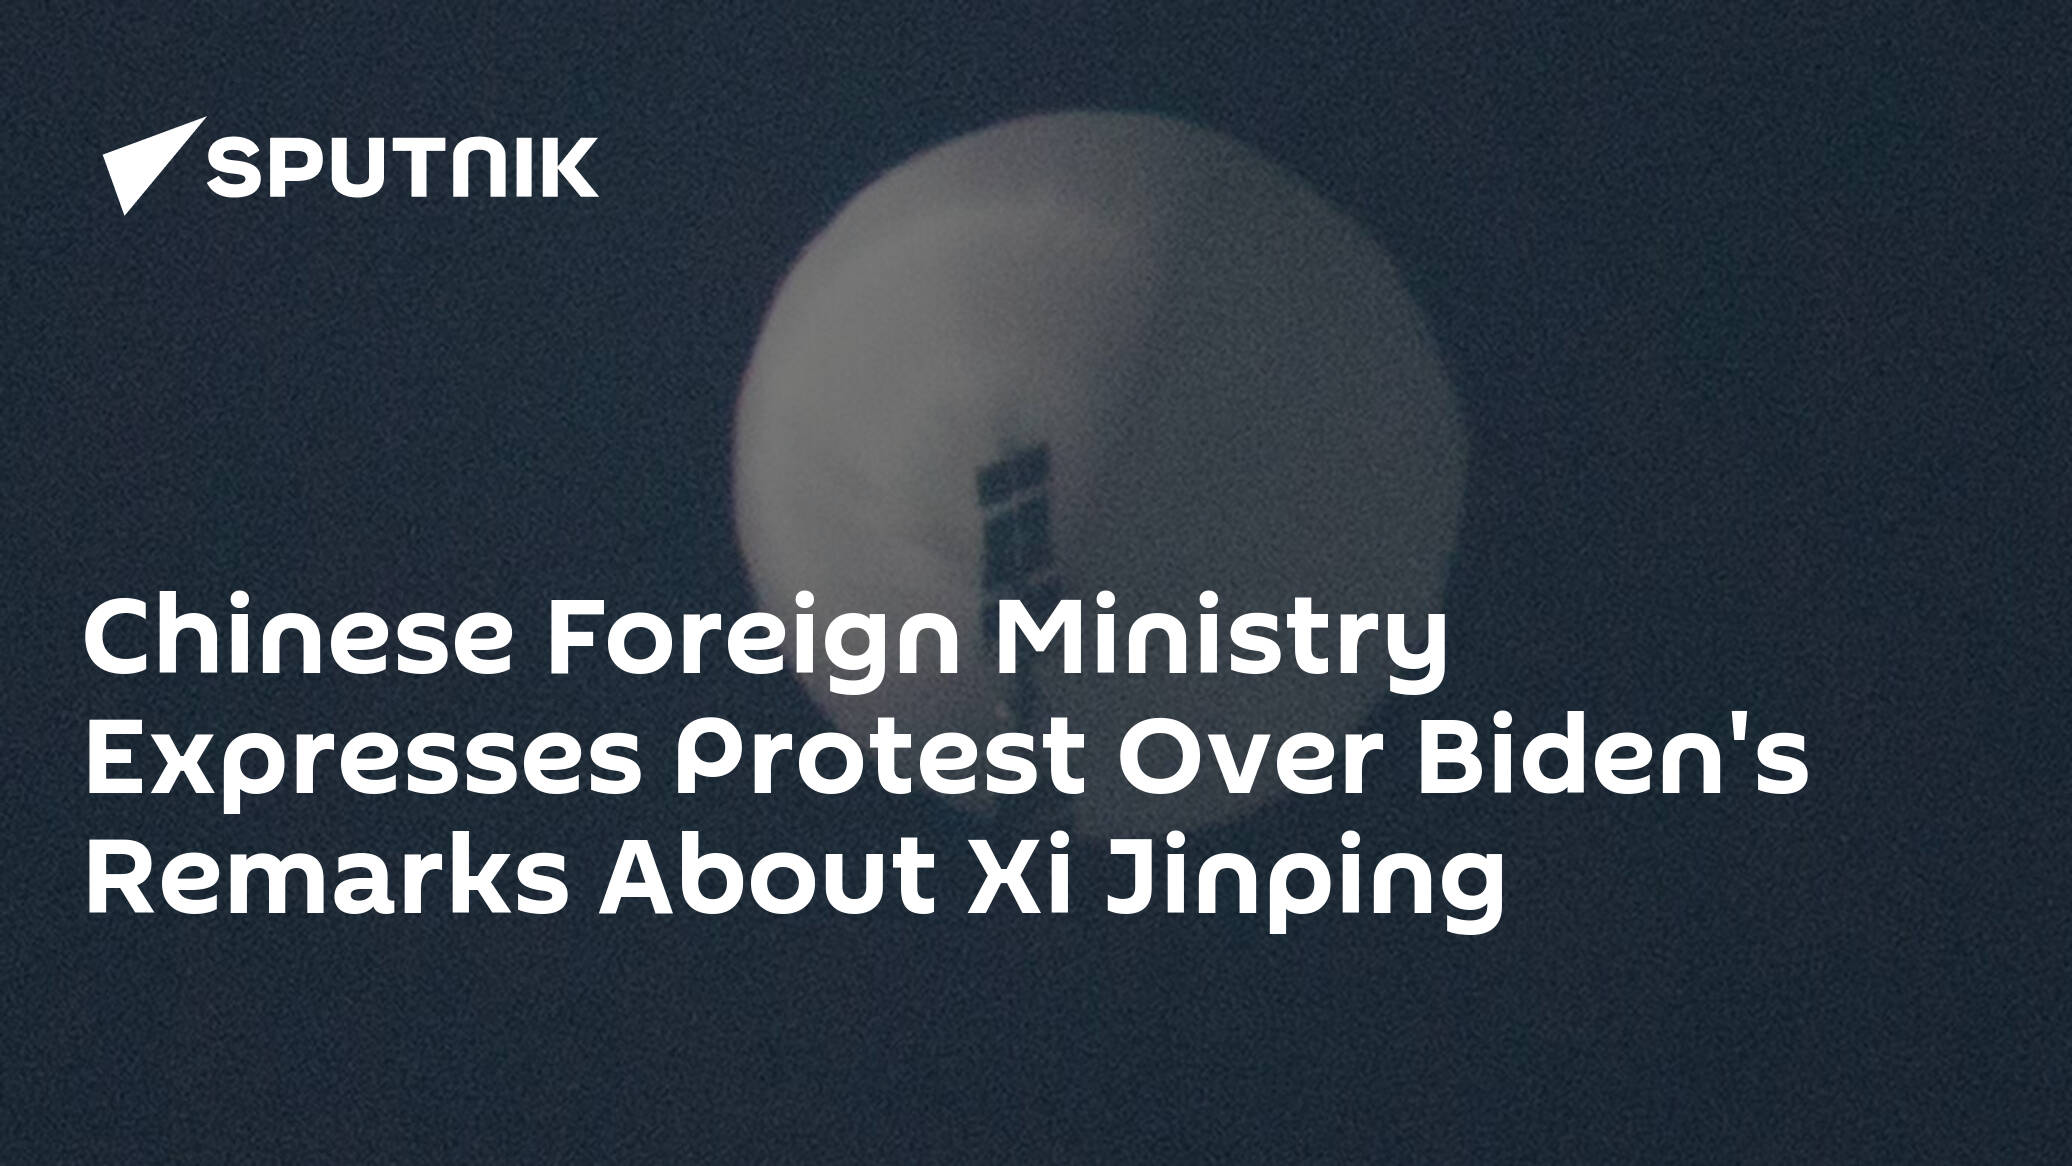 Chinese Foreign Ministry Expresses Protest Over Biden's Remarks About Xi Jinping